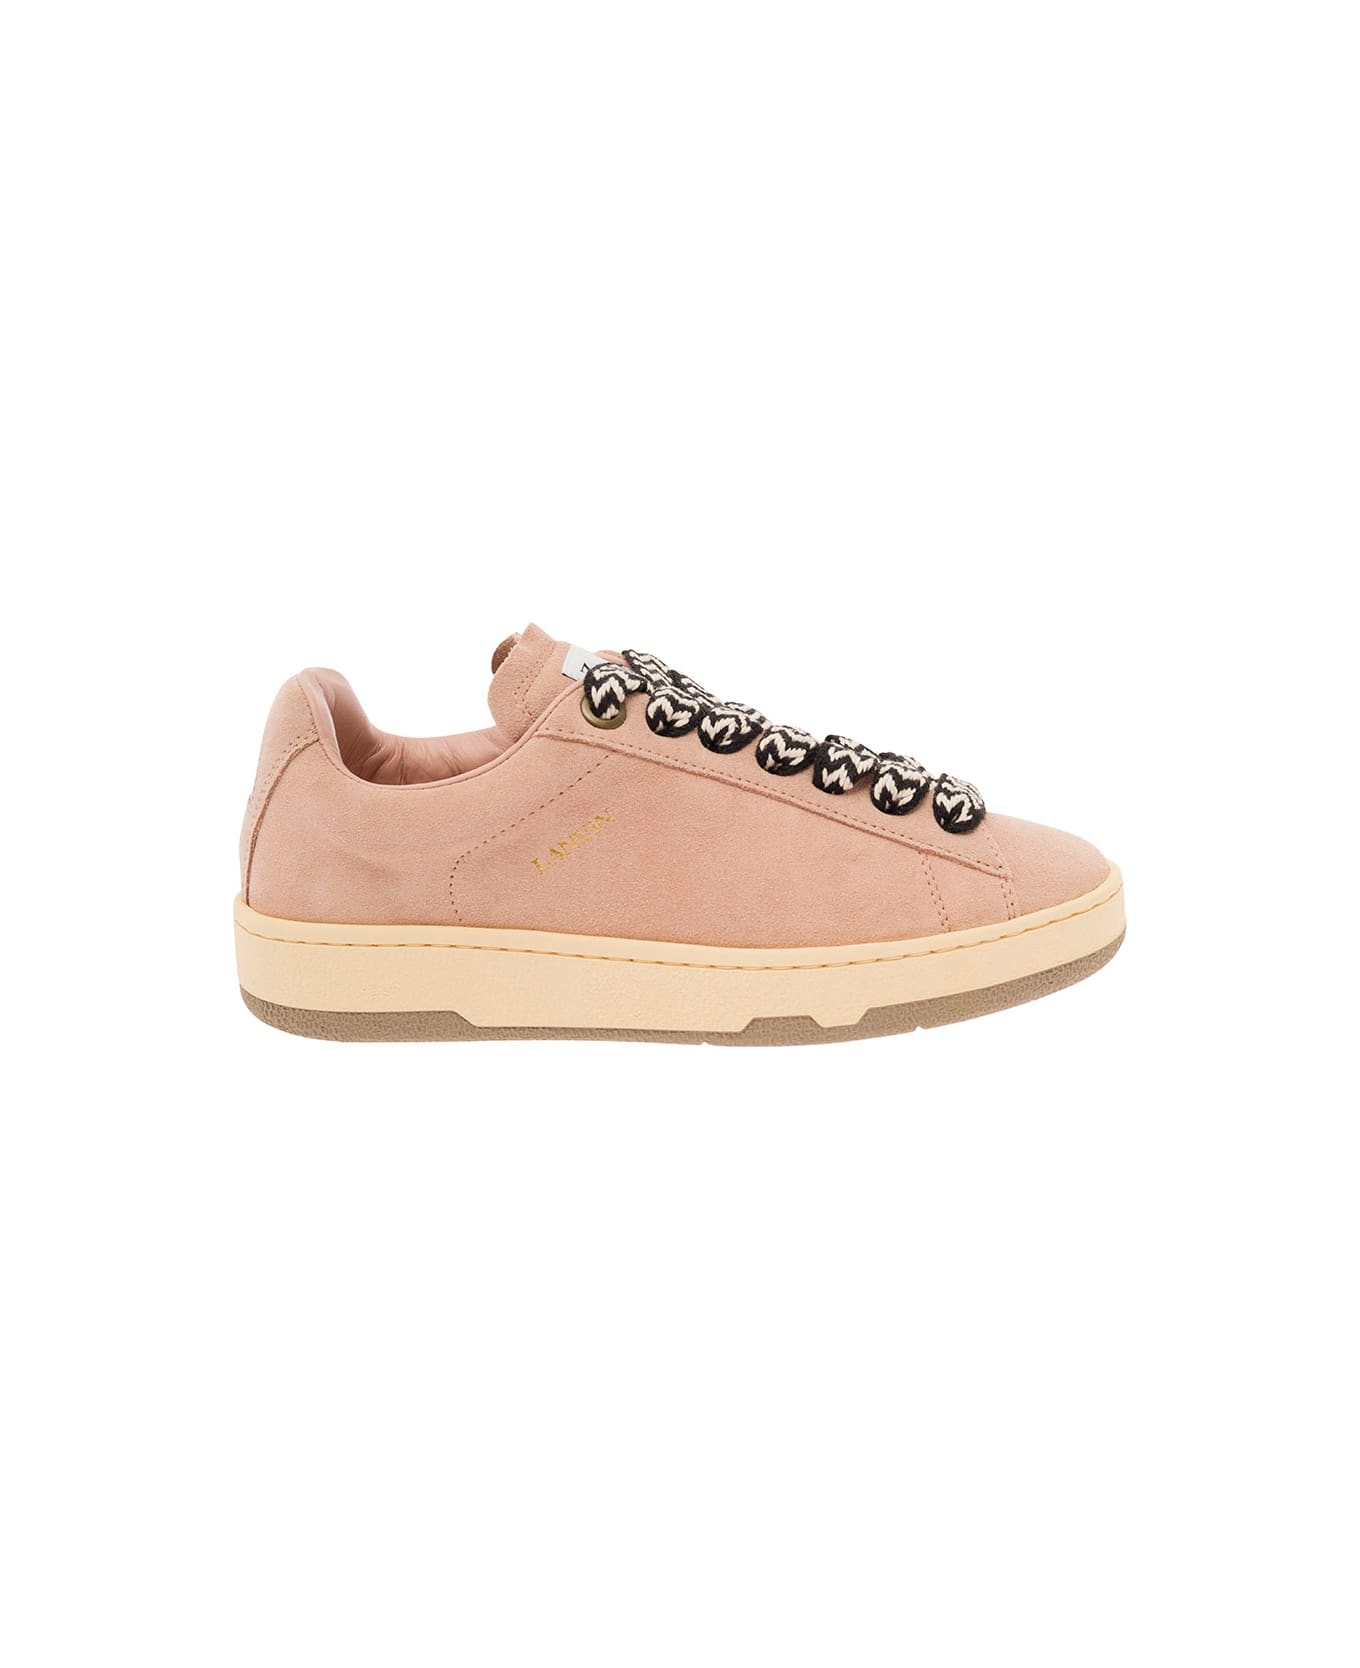 Lanvin 'lite Curb' Pink Low Top Sneakers With Oversized Multicolor Laces In Suede Woman - Pink スニーカー